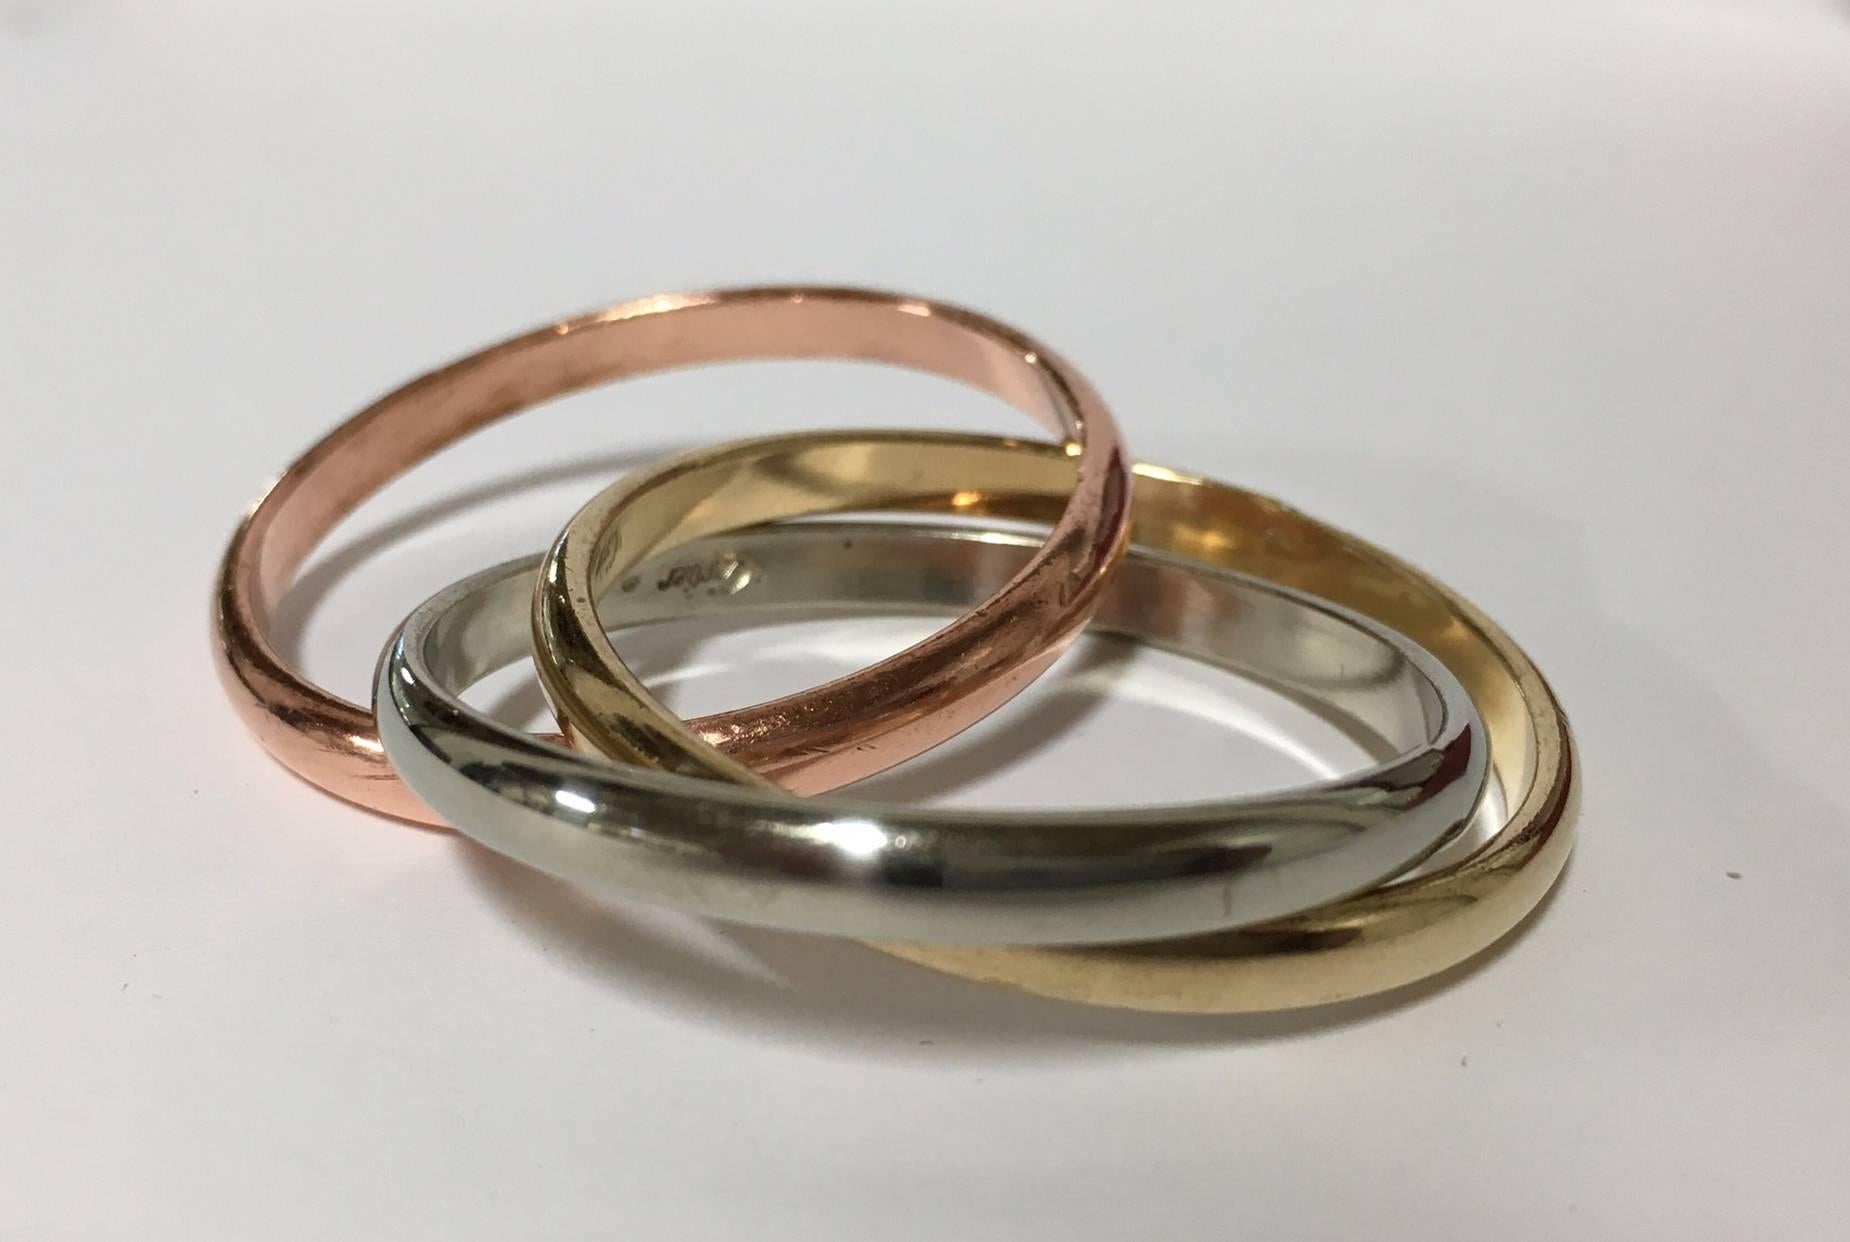 Set of four yellow, silver and rose gold-tone Cartier Trinity interlocking napkin rings. Includes original box. The rings have a diameter of 2.5 inches (each).